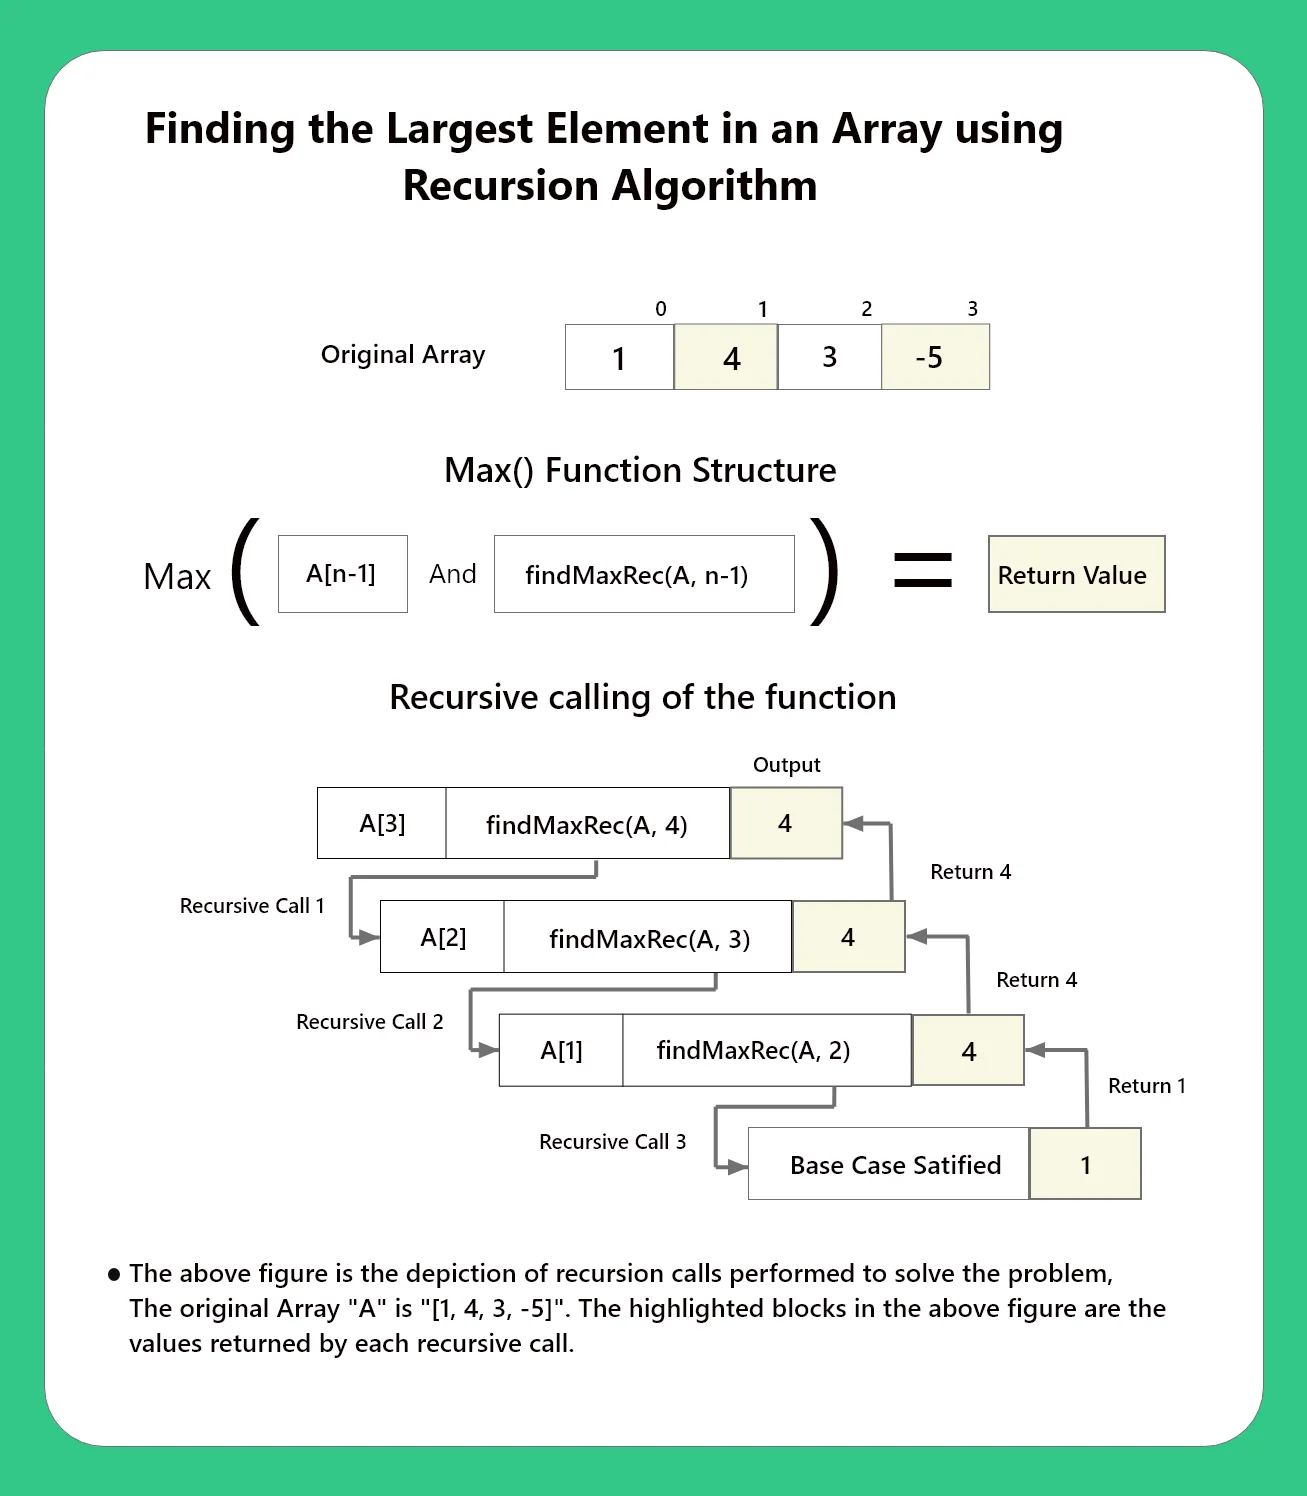 Find the Largest Element in an Array using Recursion in C